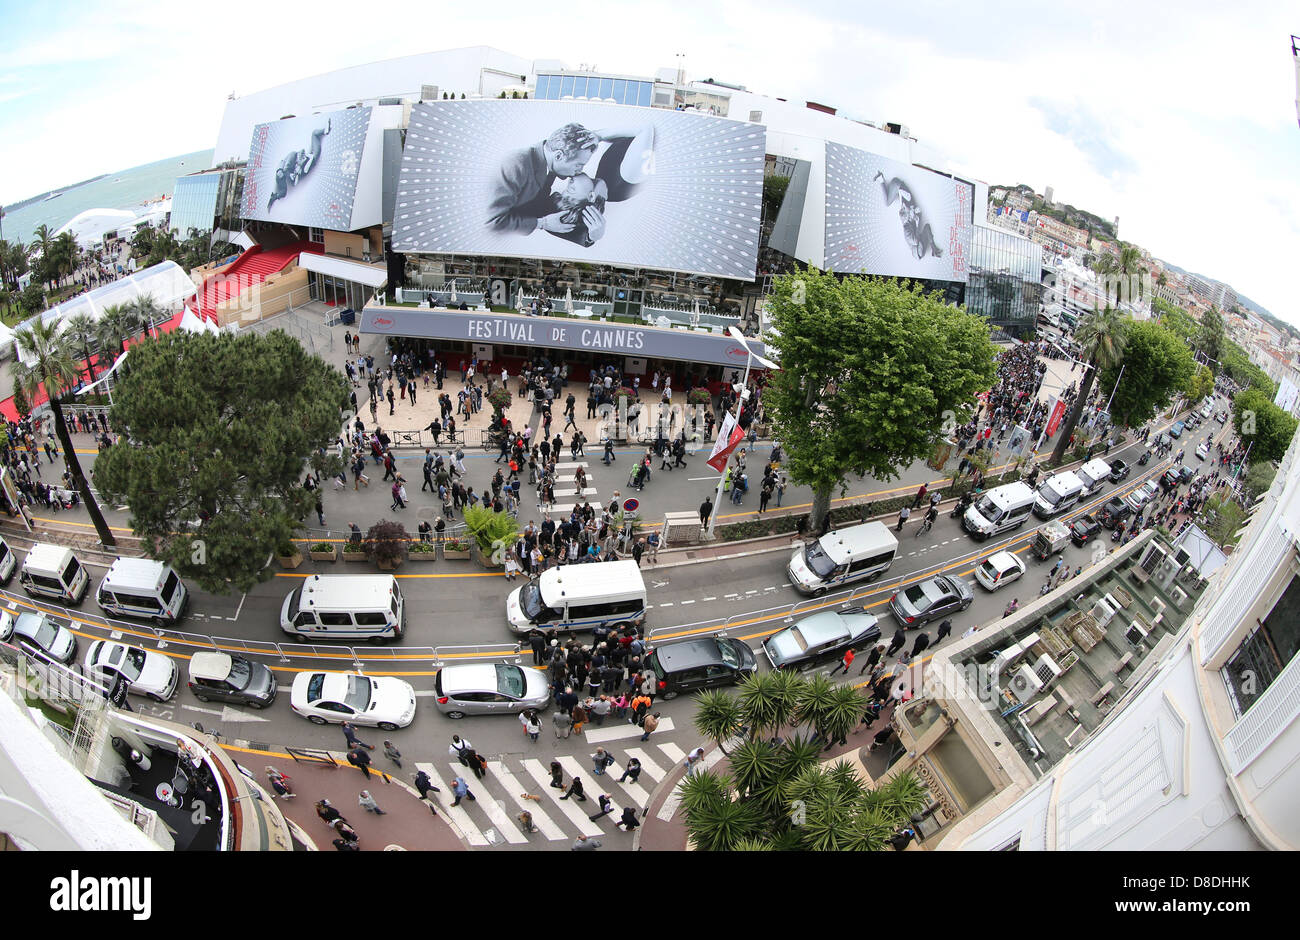 Cannes Film Festival 2013: Wide Angle and Fisheye Shots Stock Photo